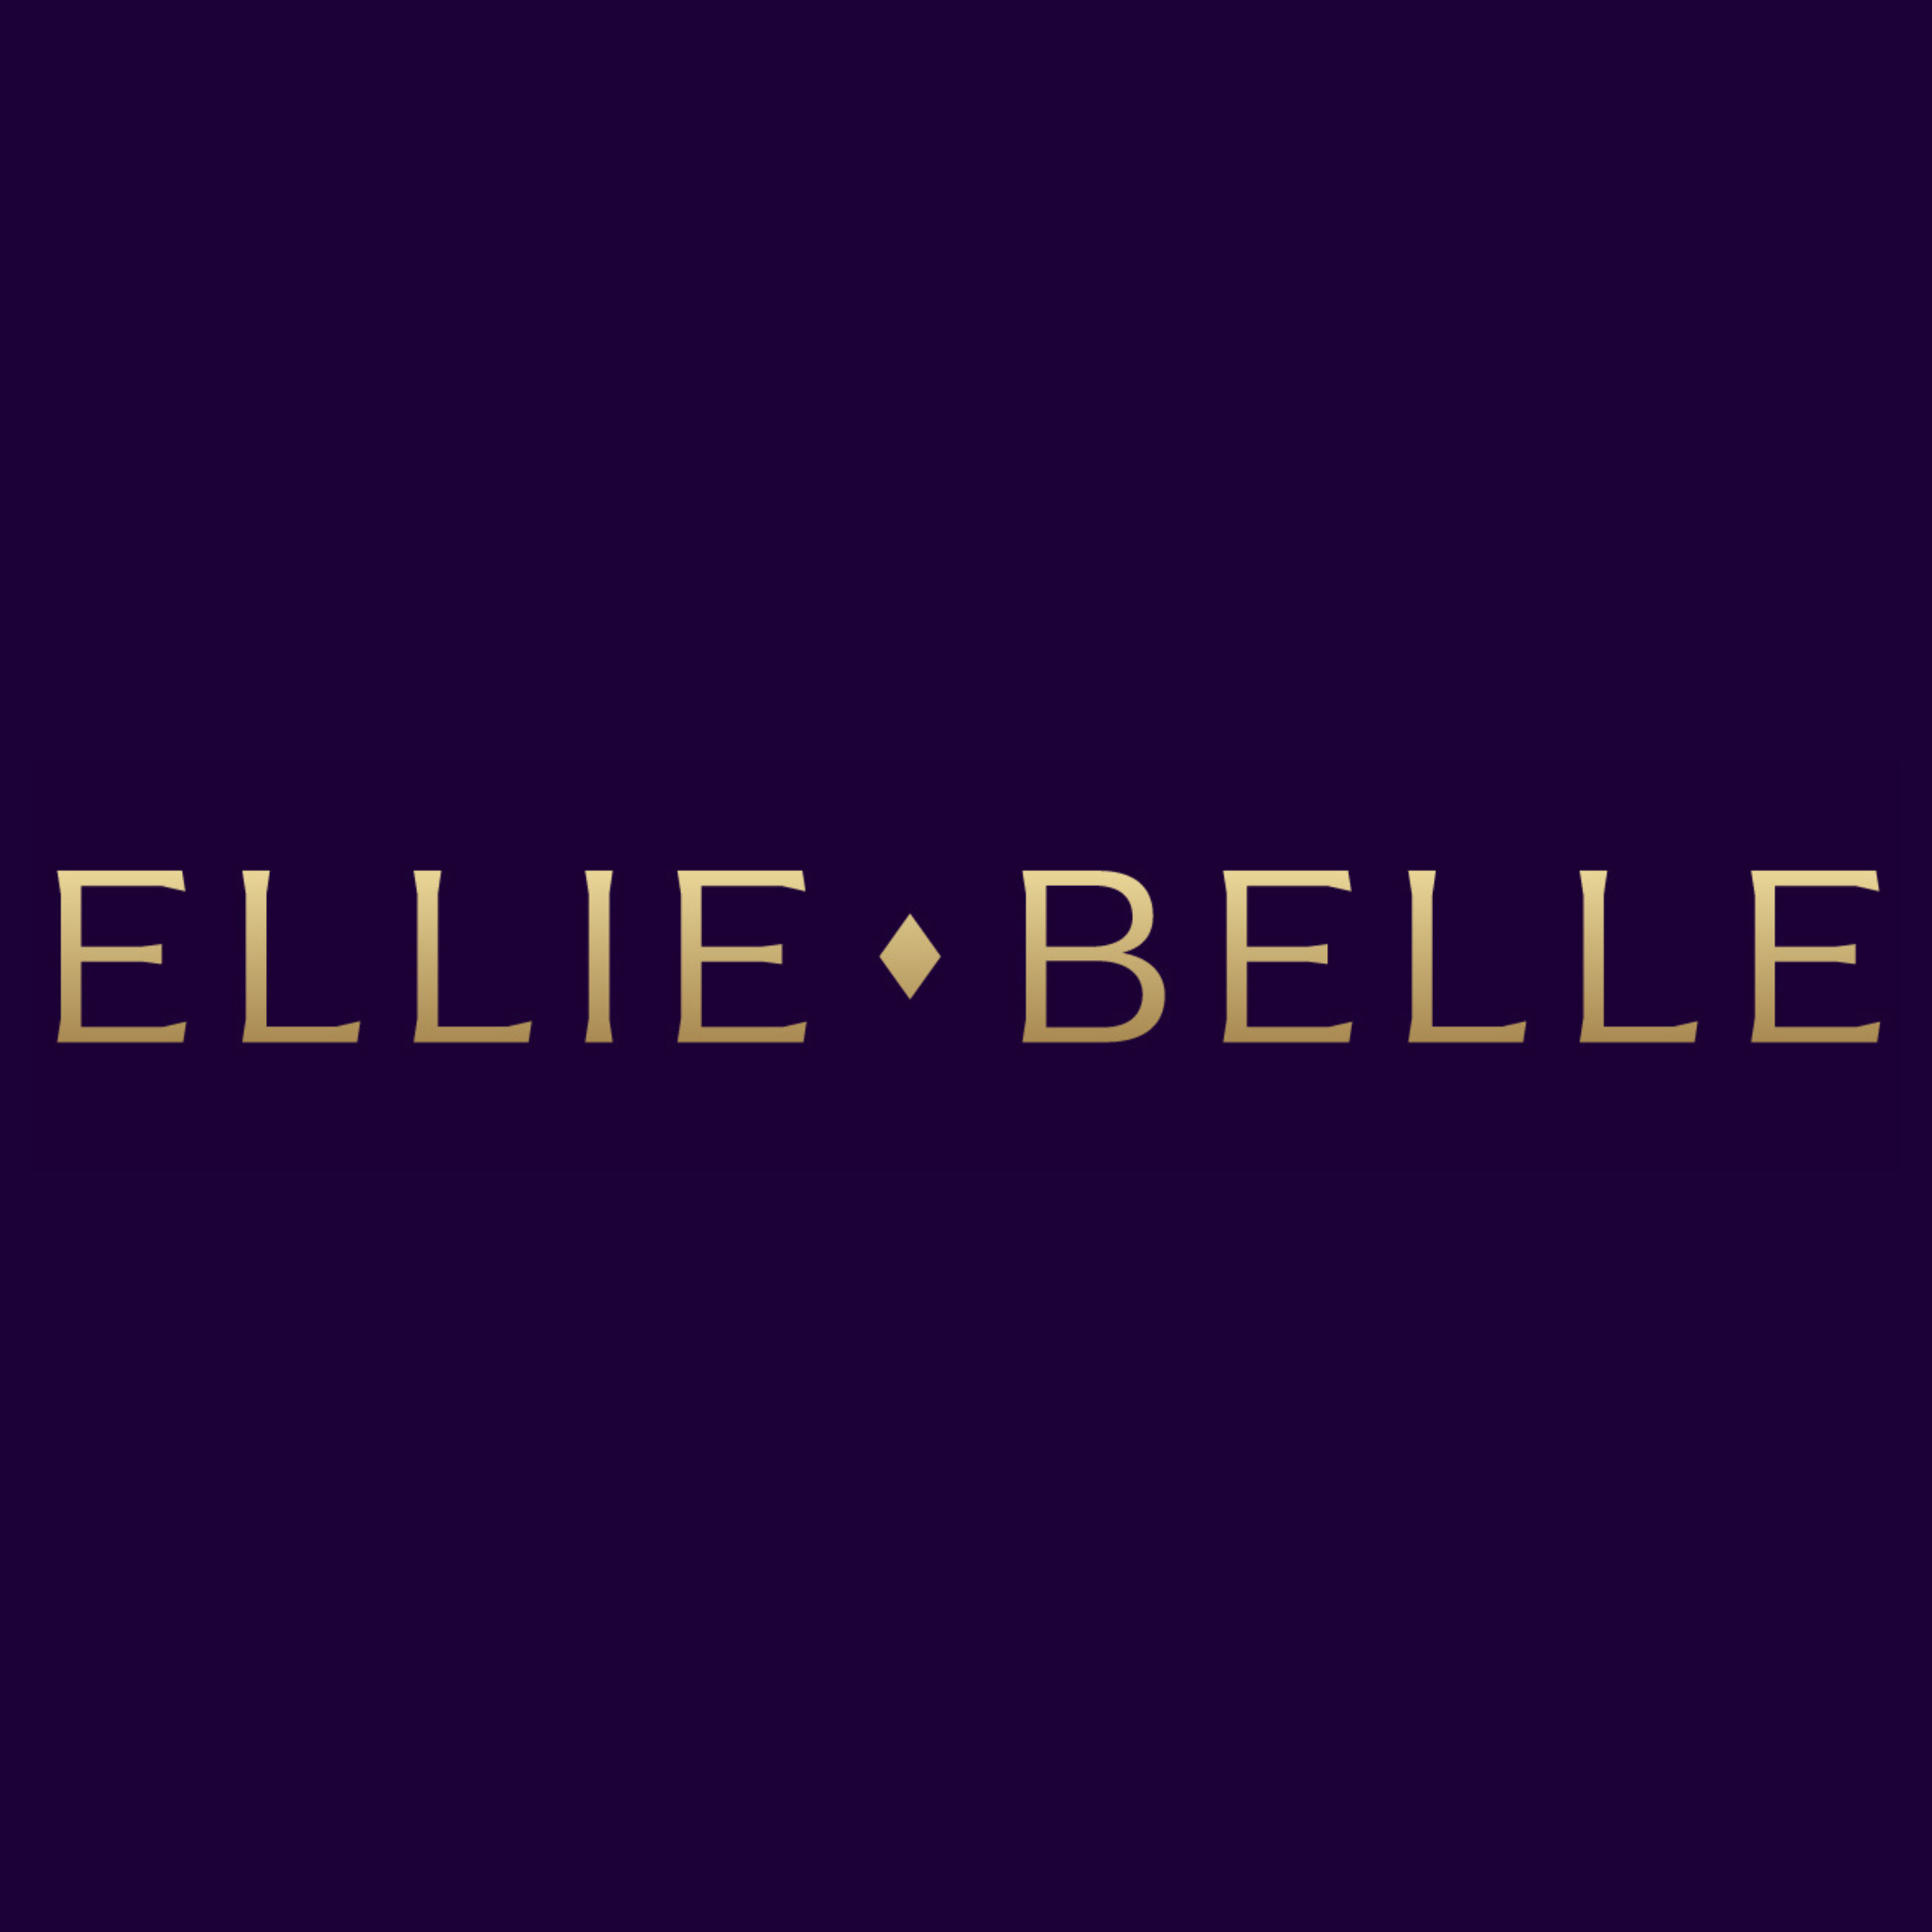 Ellie Belle Introduces An Extensive Collection Of High-End Designer Wear Of Leading Brands At Affordable Prices